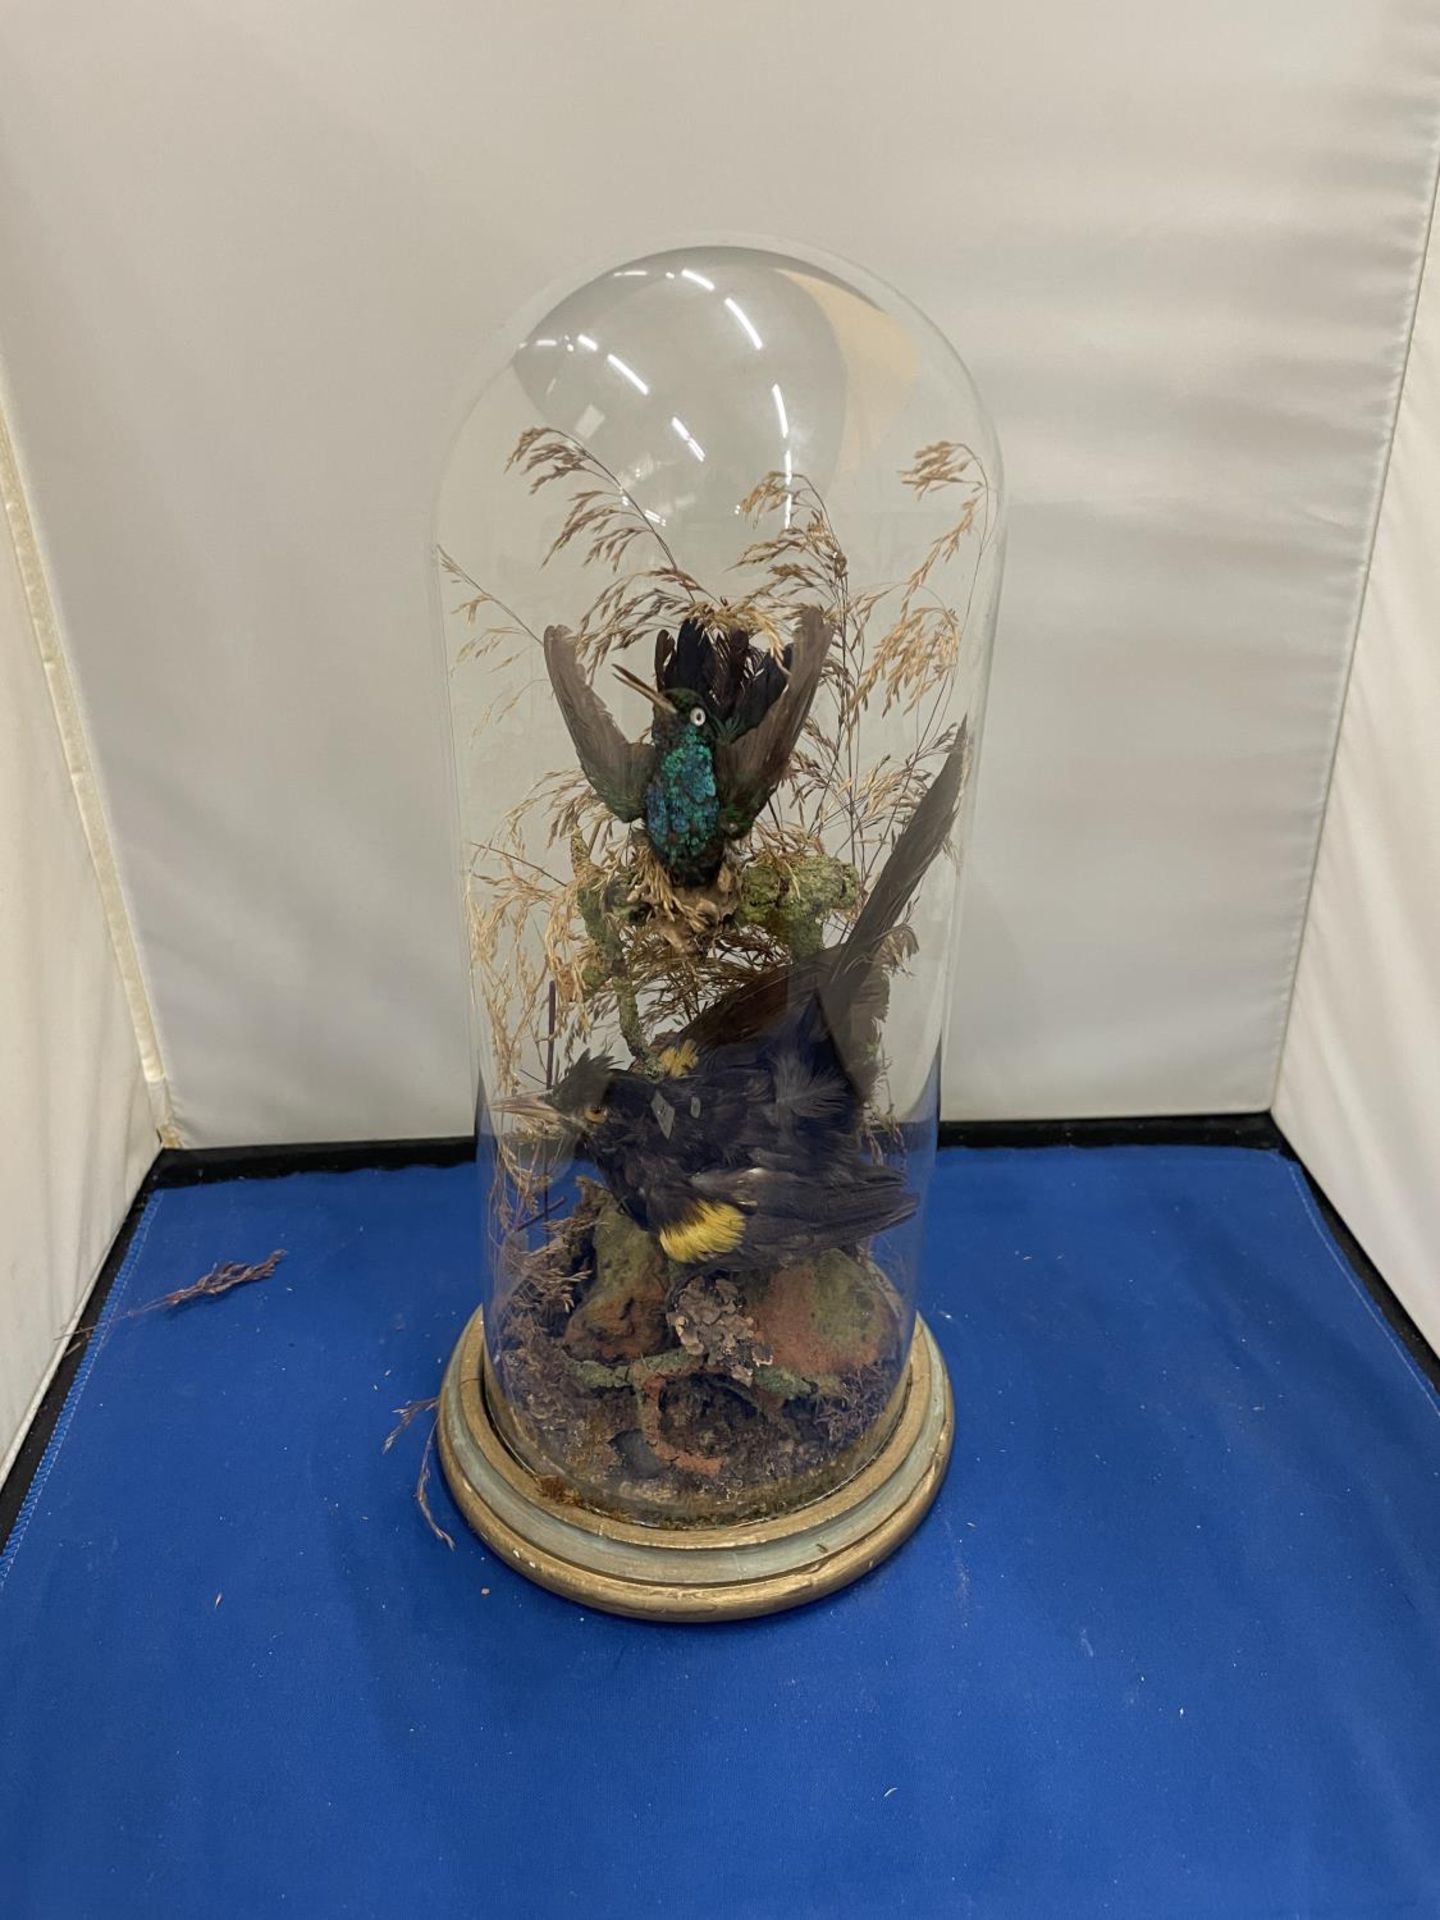 A TAXIDERMY OF TWO BIRDS ON A LOG WITH FOLIAGE IN A GLASS DOME